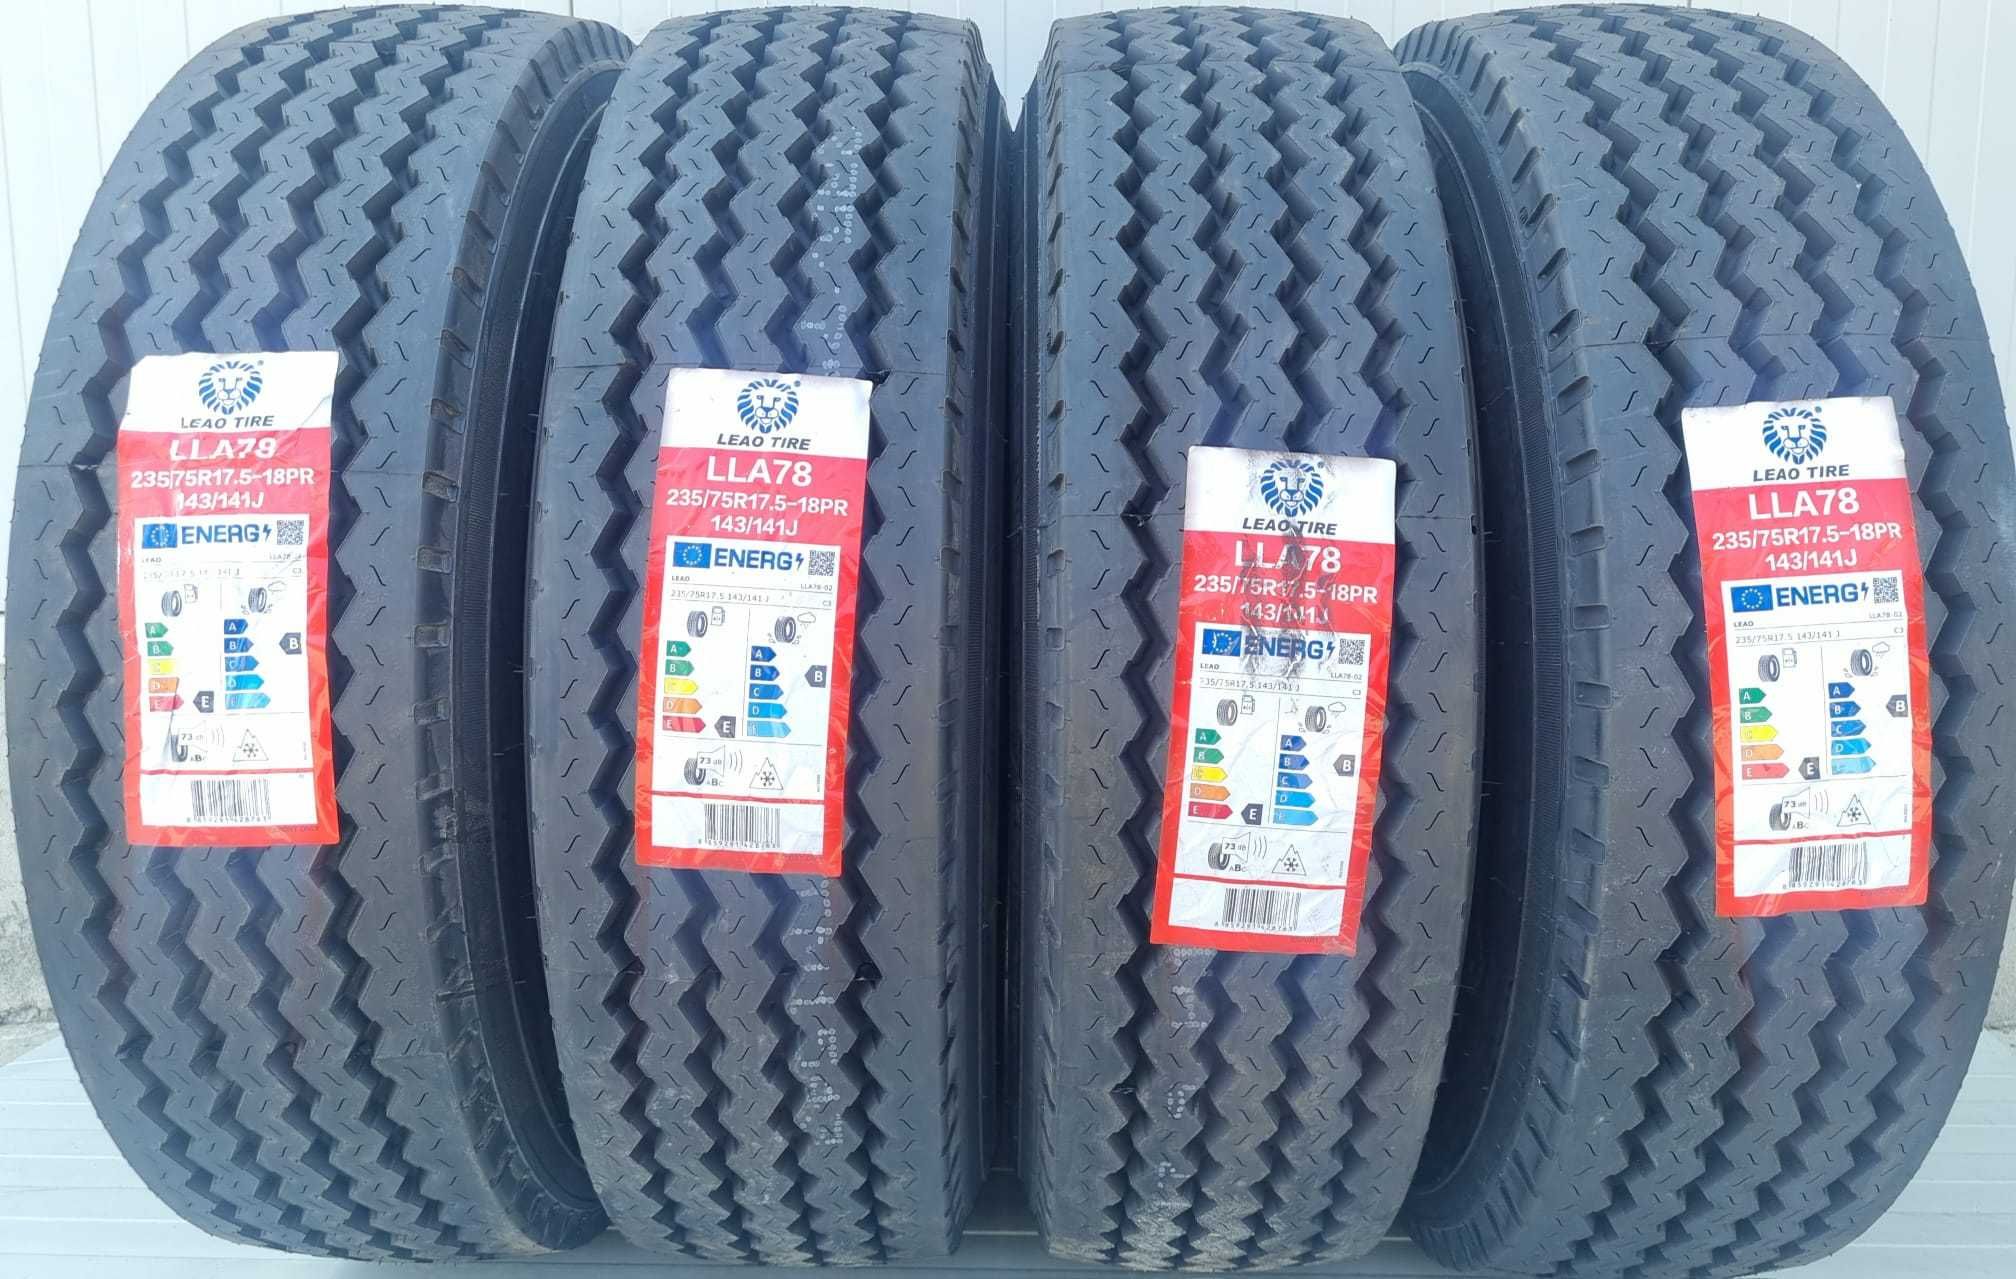 PROMO, 235/75 R17.5, 143/141J, LEAO, Anvelope toate axele M+S